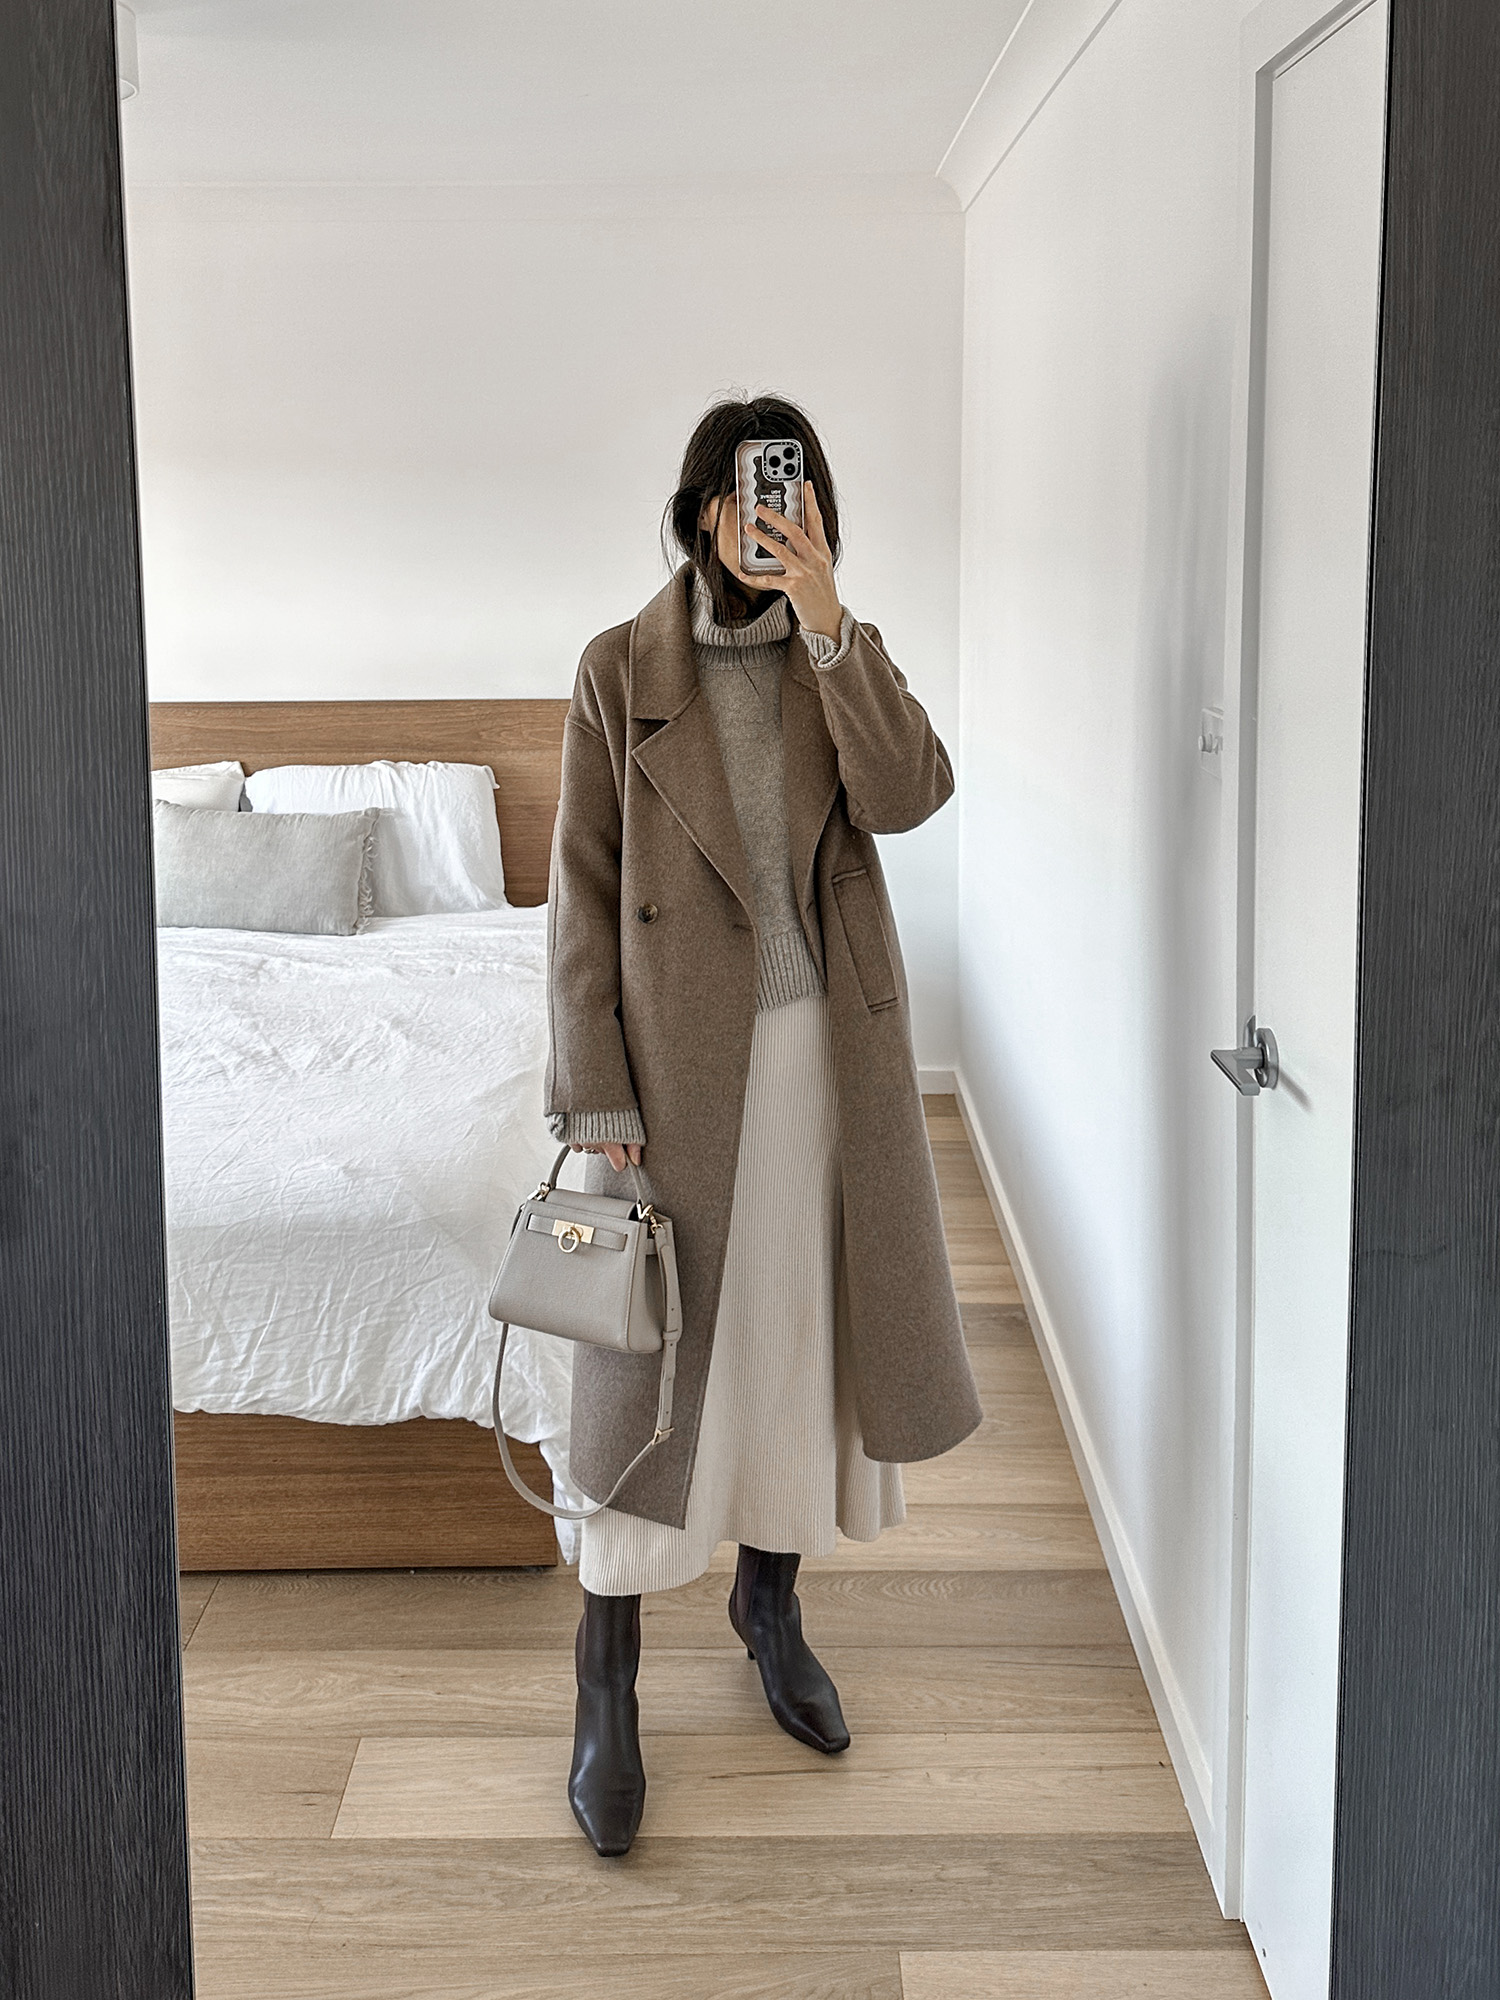 old Celine sweater sezane naelle skirt with The Curated London coat